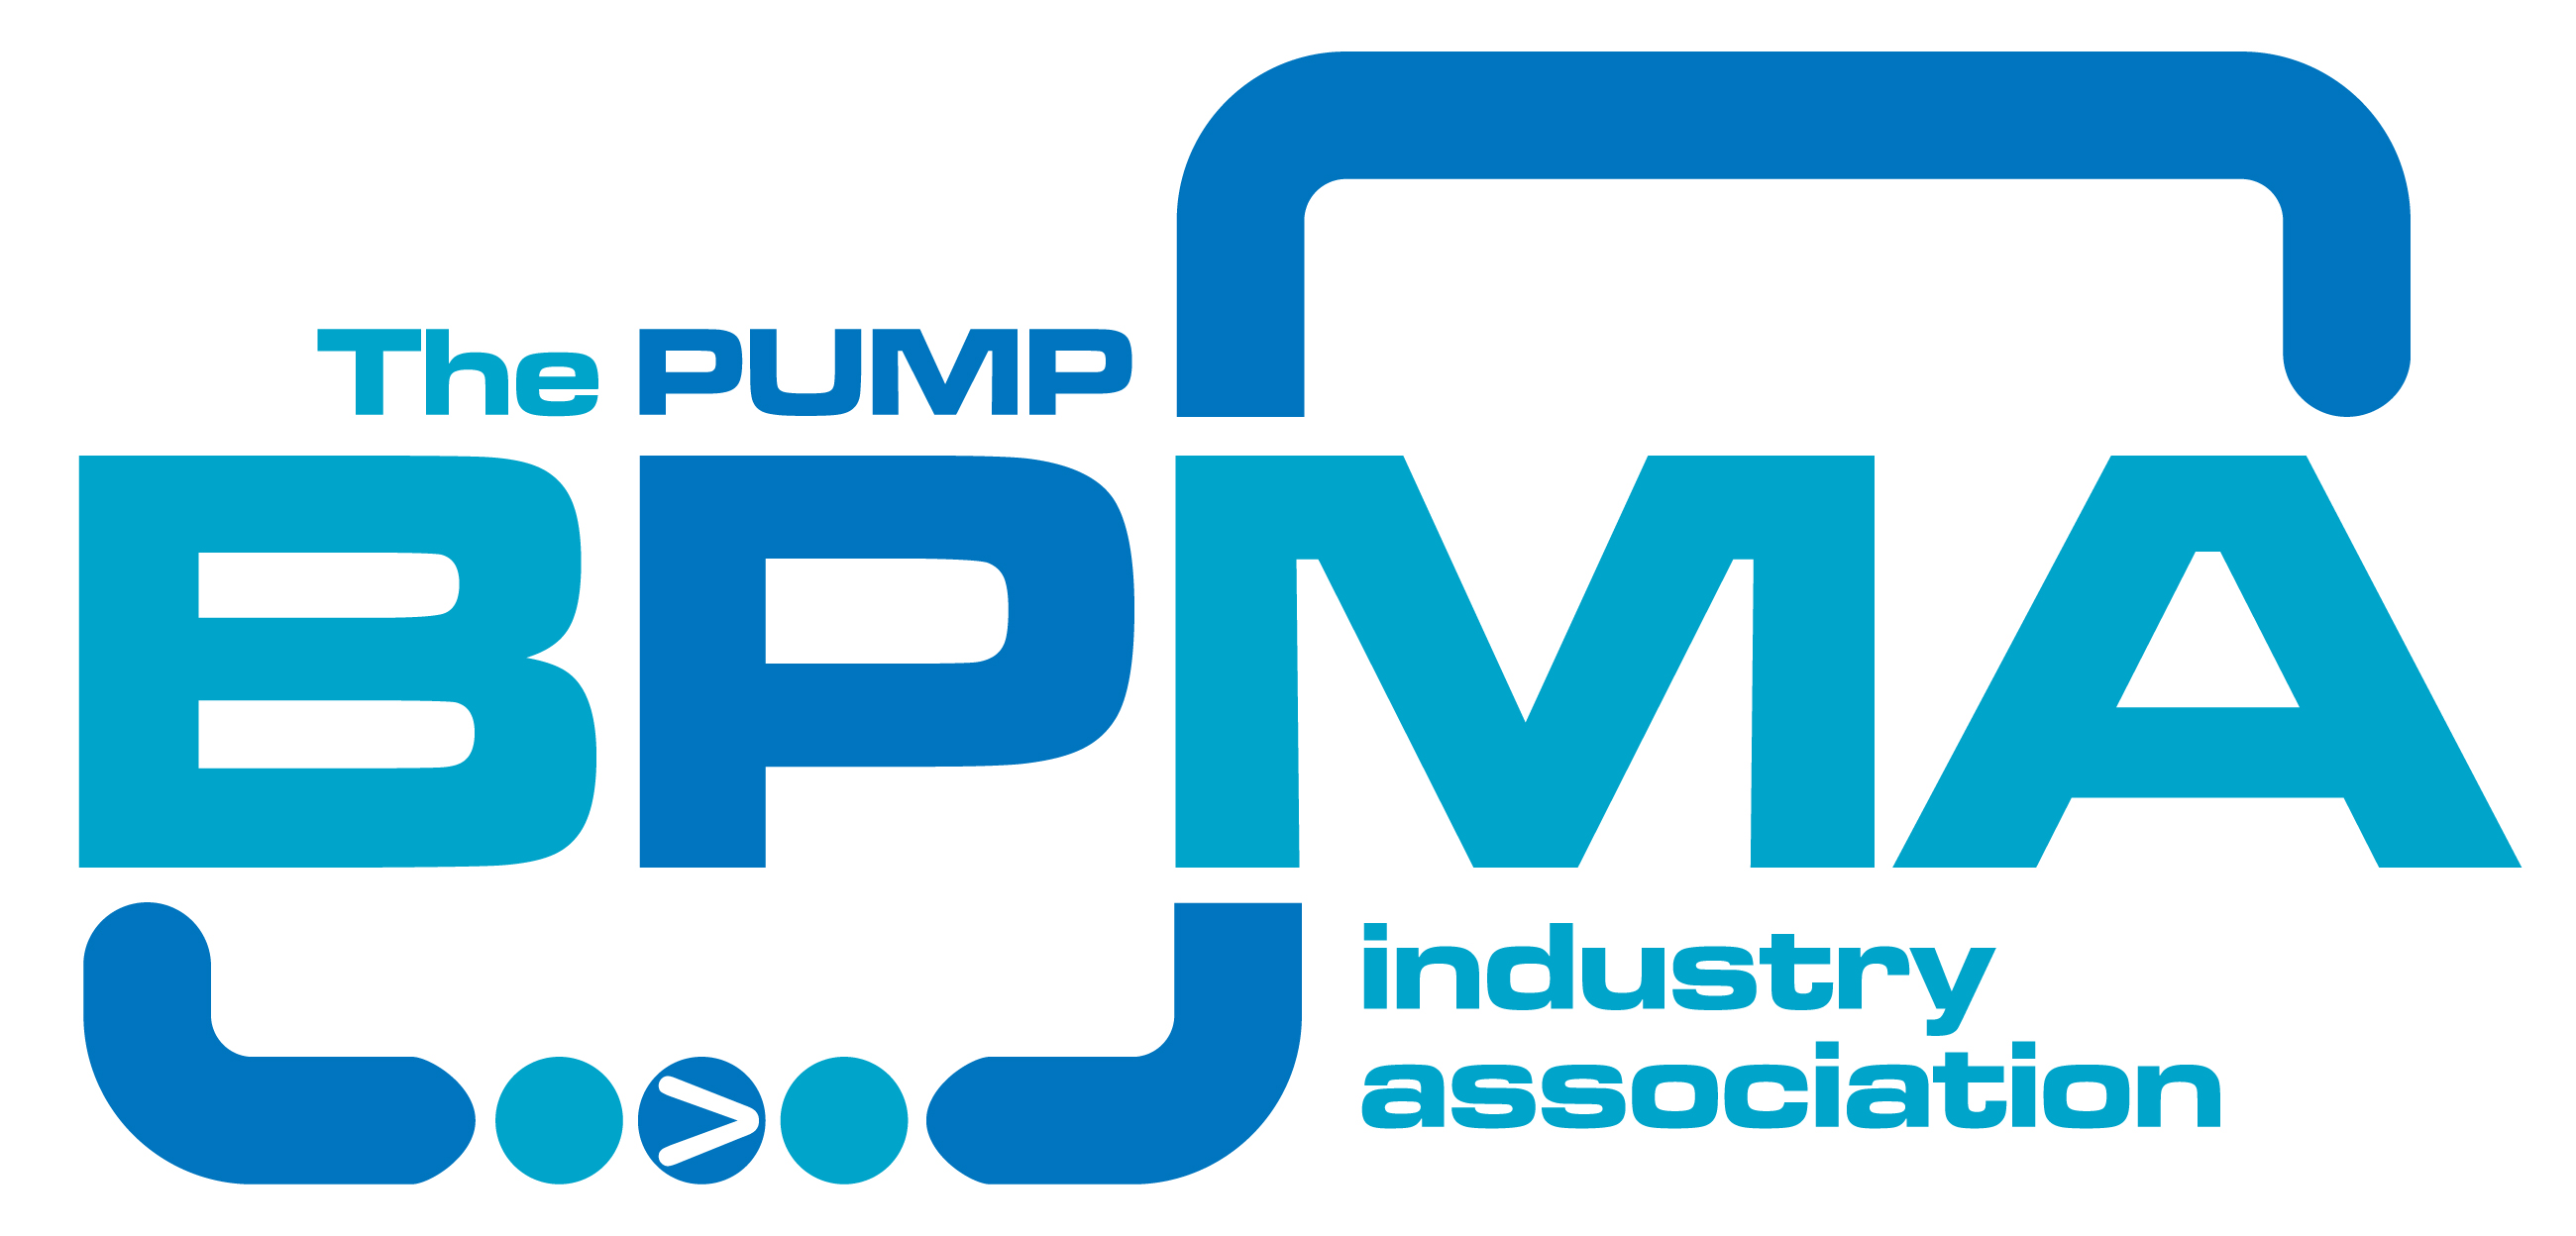 The British Pump Manufacturers Association (BPMA) represents the business interests of UK and Irish suppliers of liquid pumps and related equipment.